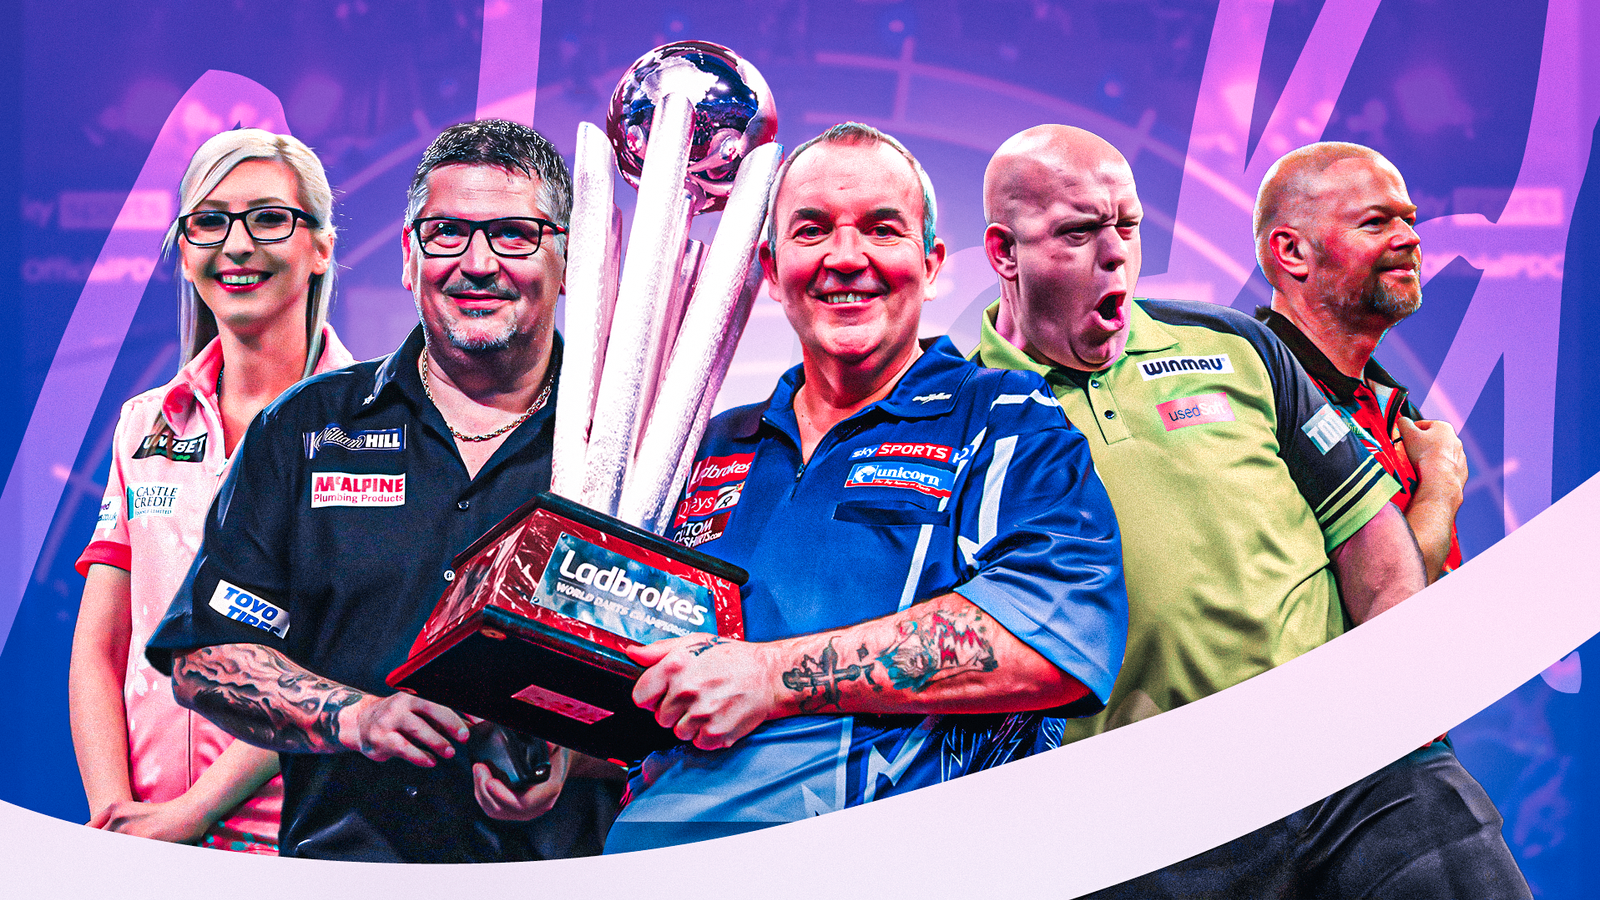 Lowest Ranked Previous Winners of the PDC World Darts Championship